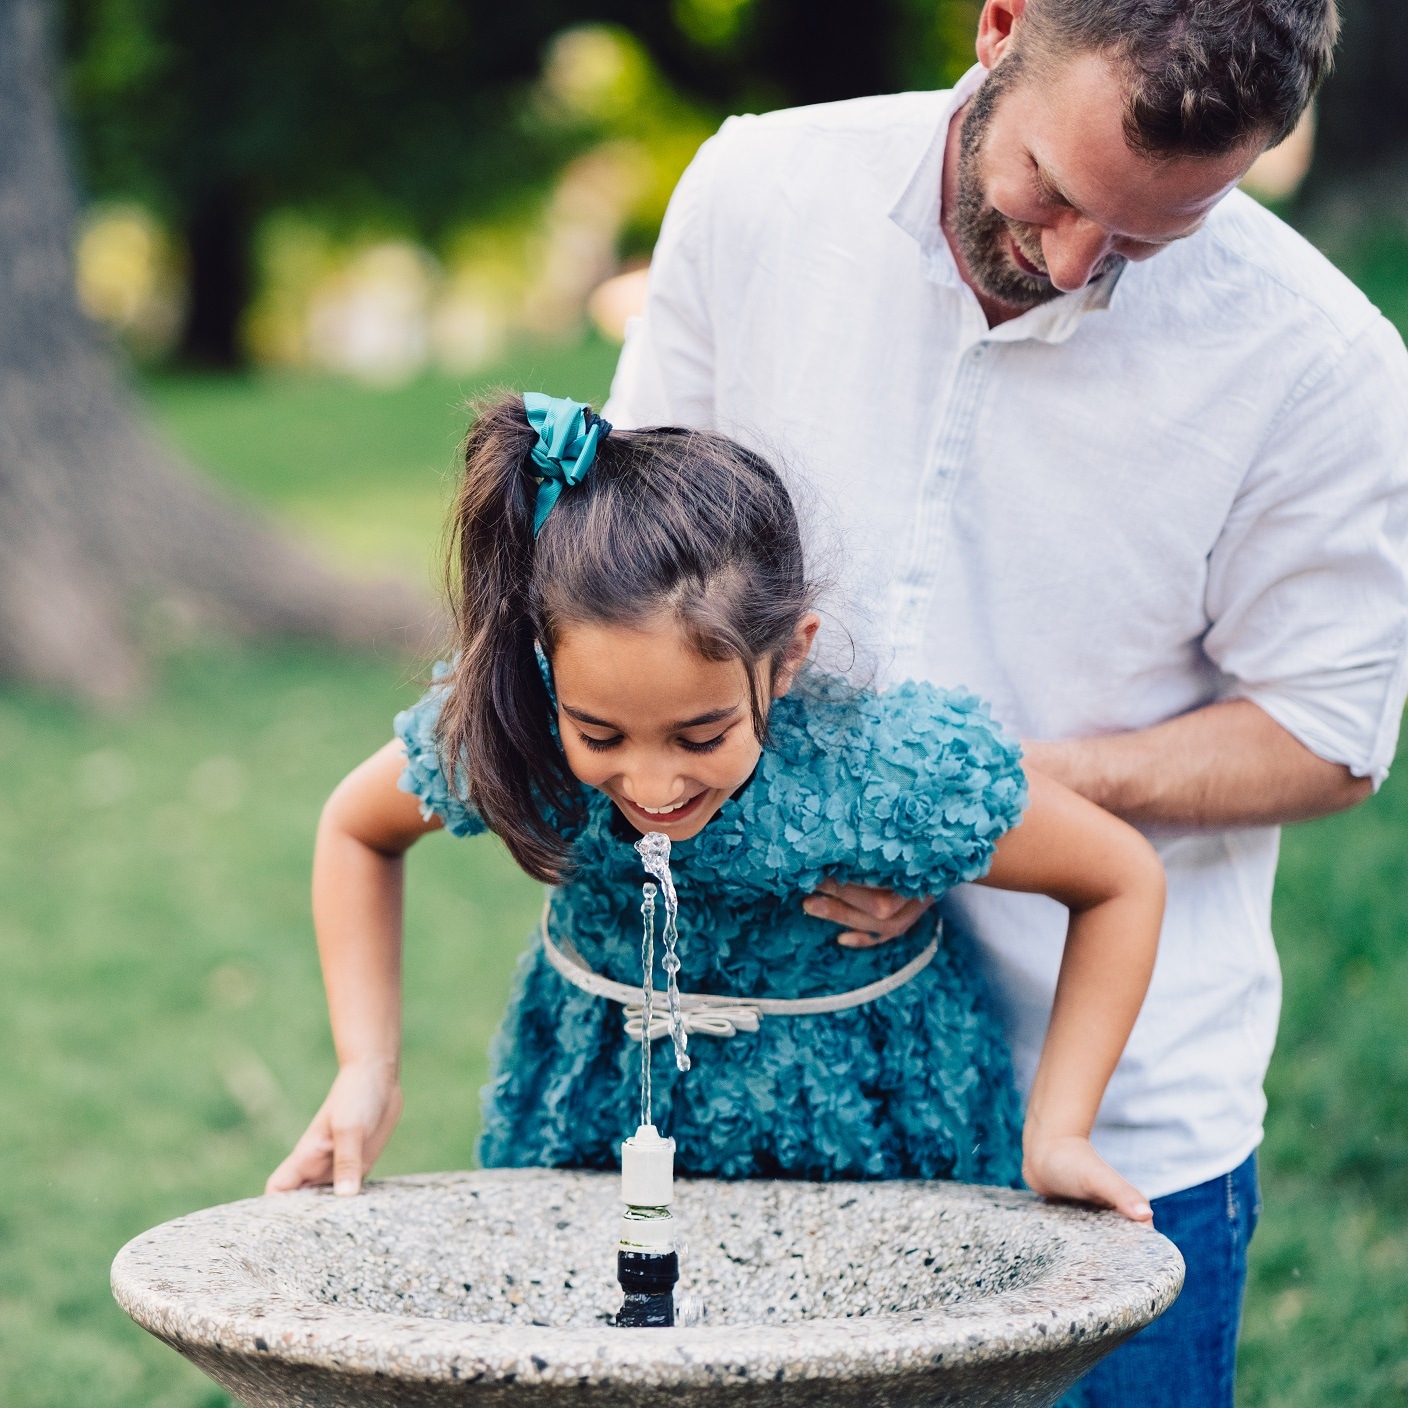 Healthcare : A little girl drinking while at a fountain